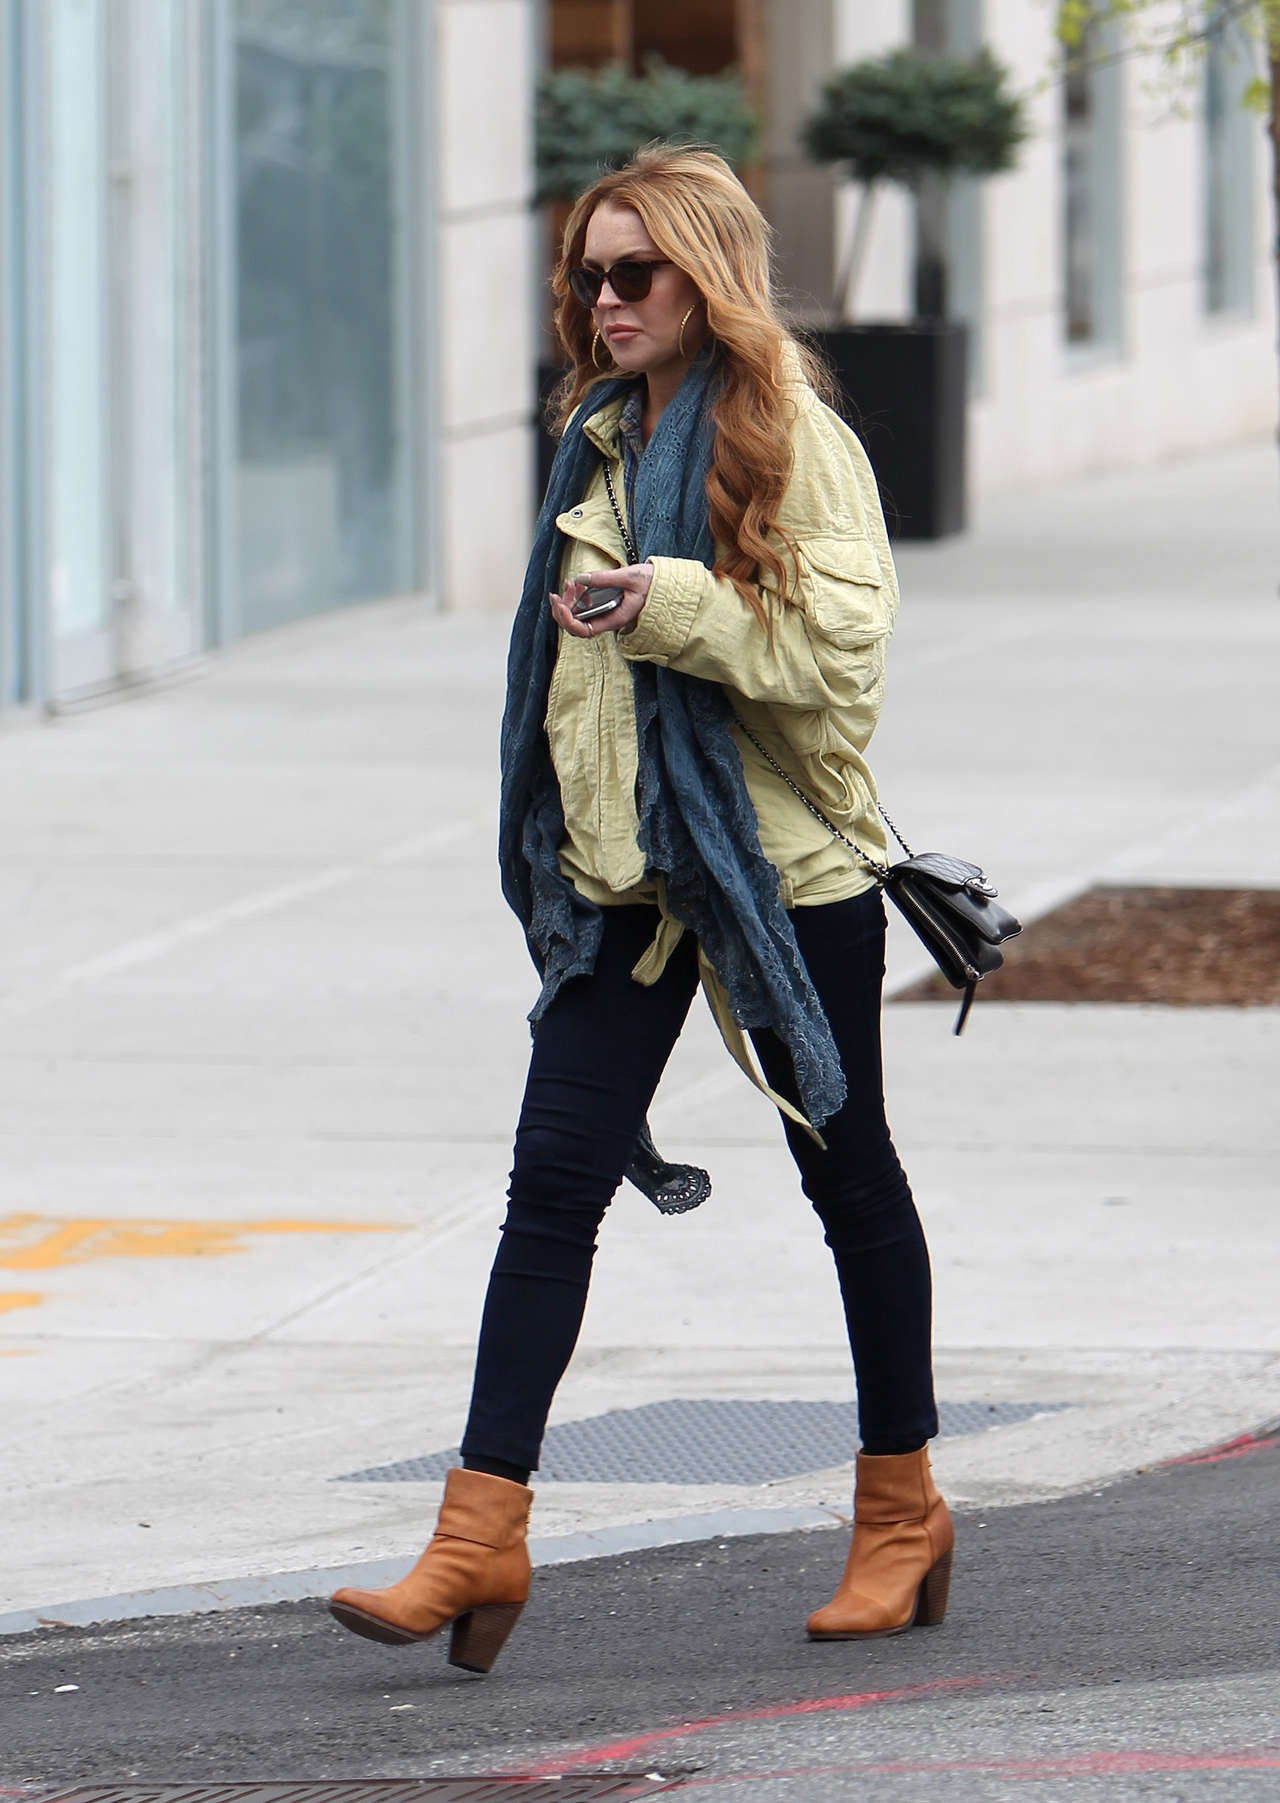 Lindsay Lohan In a Jeans visiting a vintage shop in Brooklyn